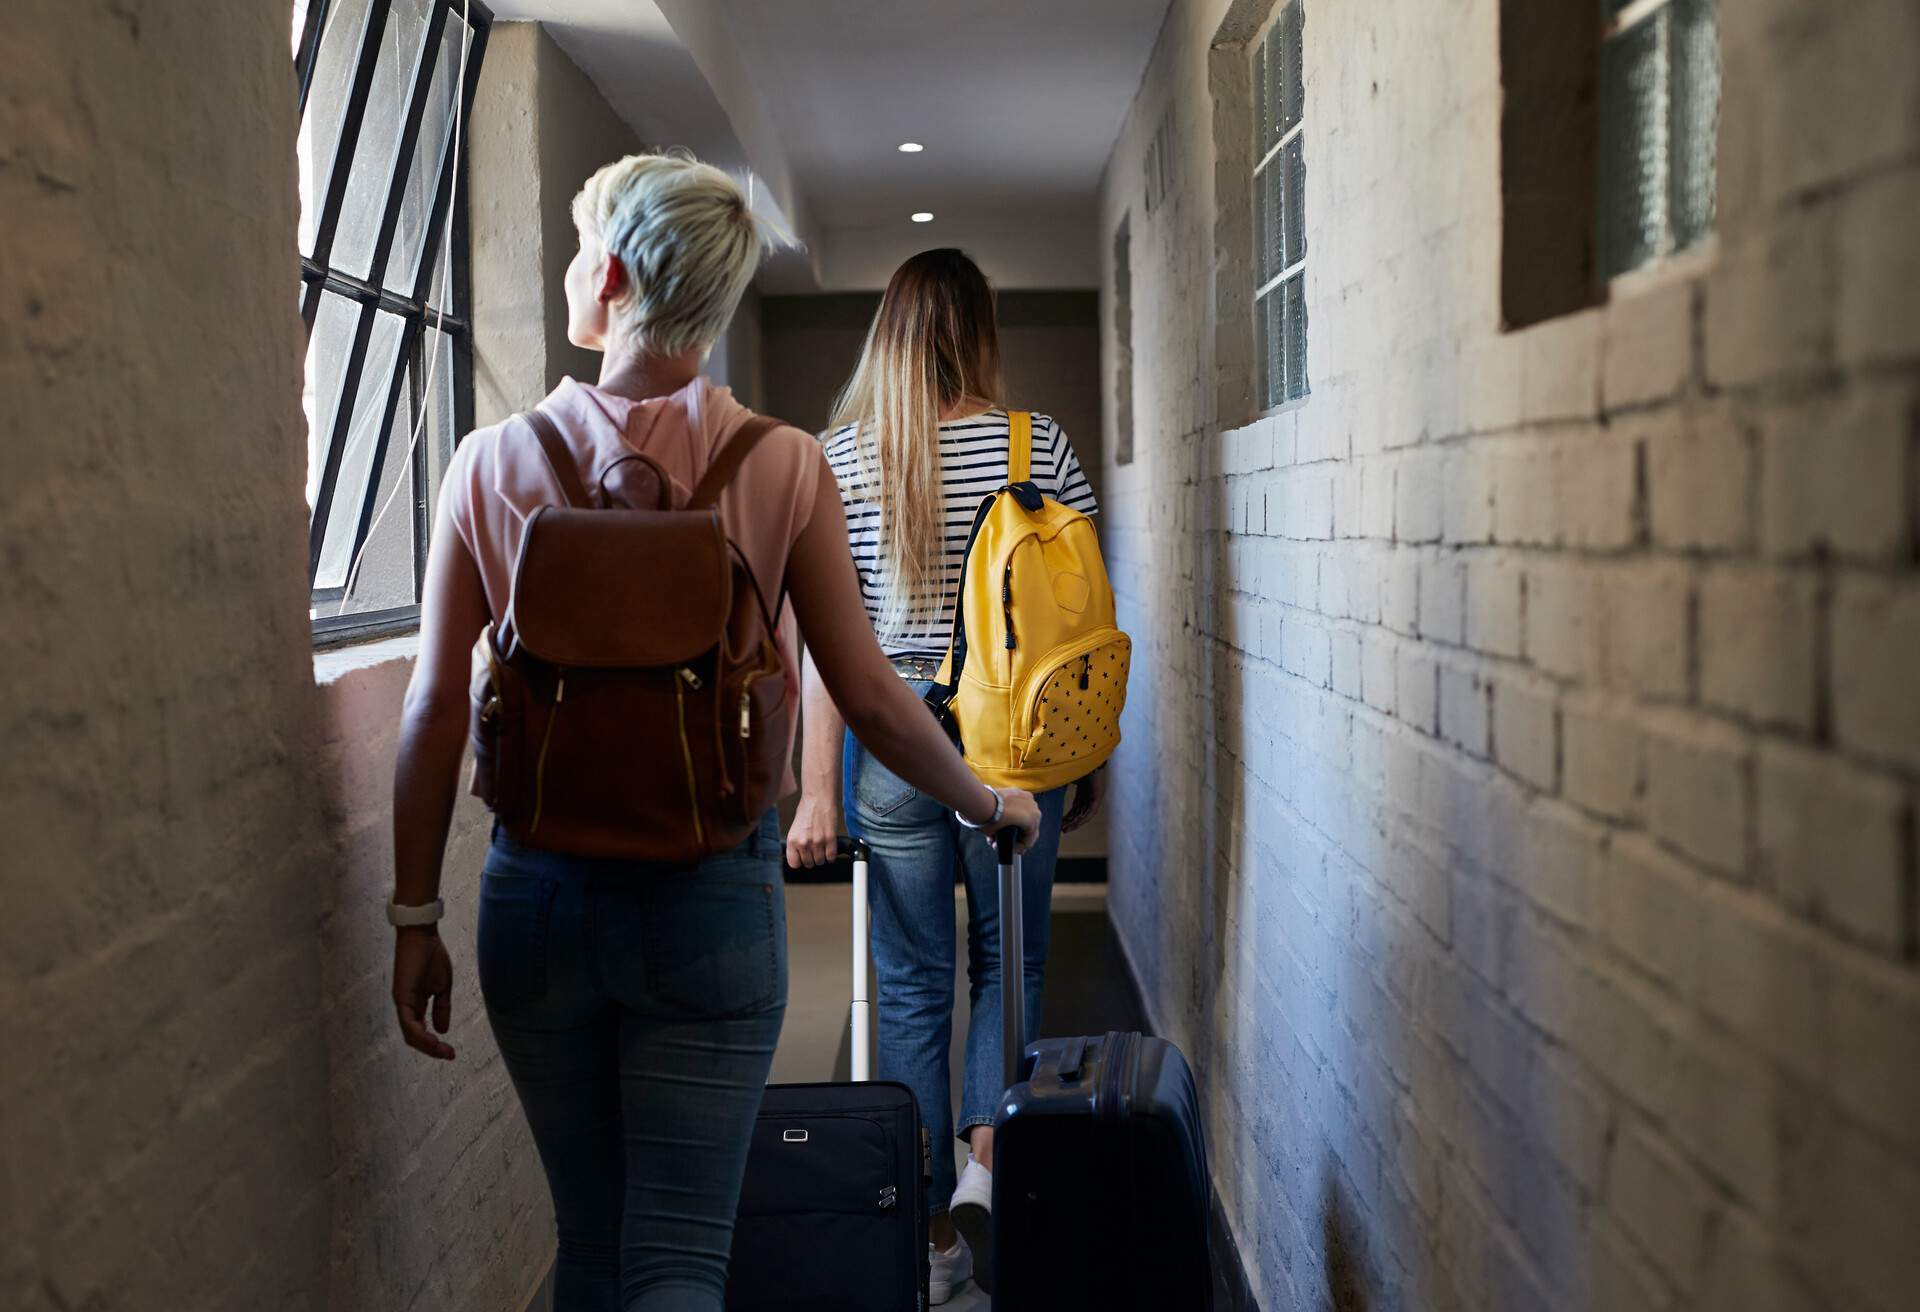 Two female friends walk into the hallway with their backpacks and luggage.